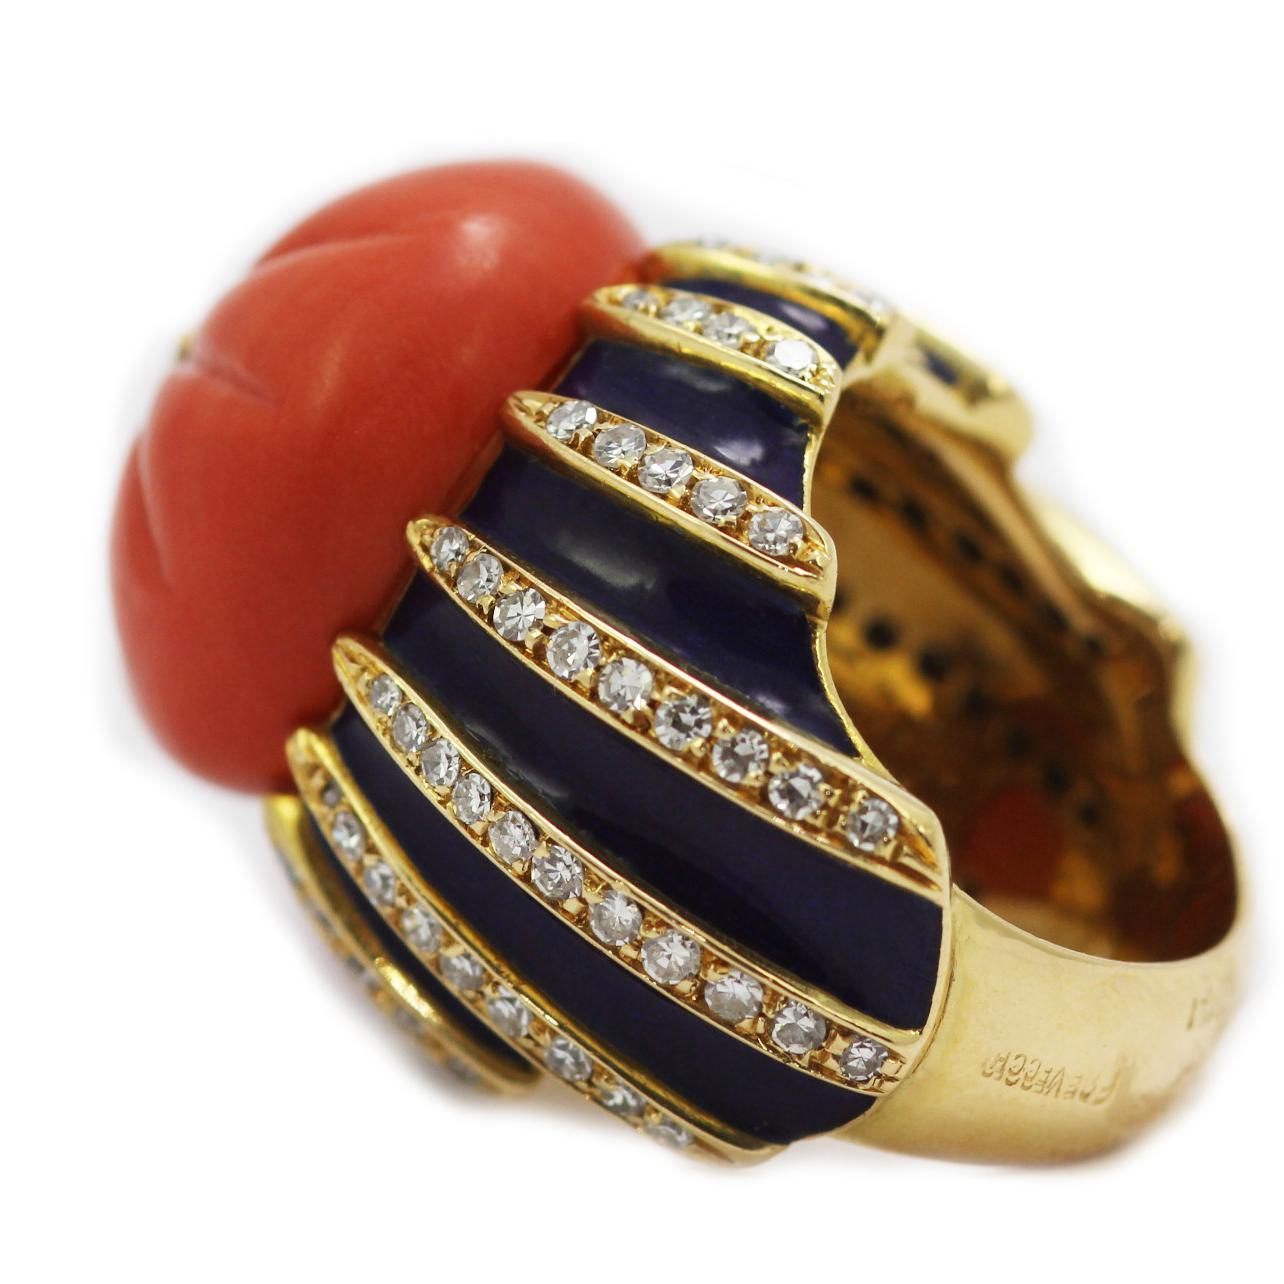 Modern Natural Carved Coral, Diamond and Enamel Ring Made in Italy 18 Karat Yellow Gold